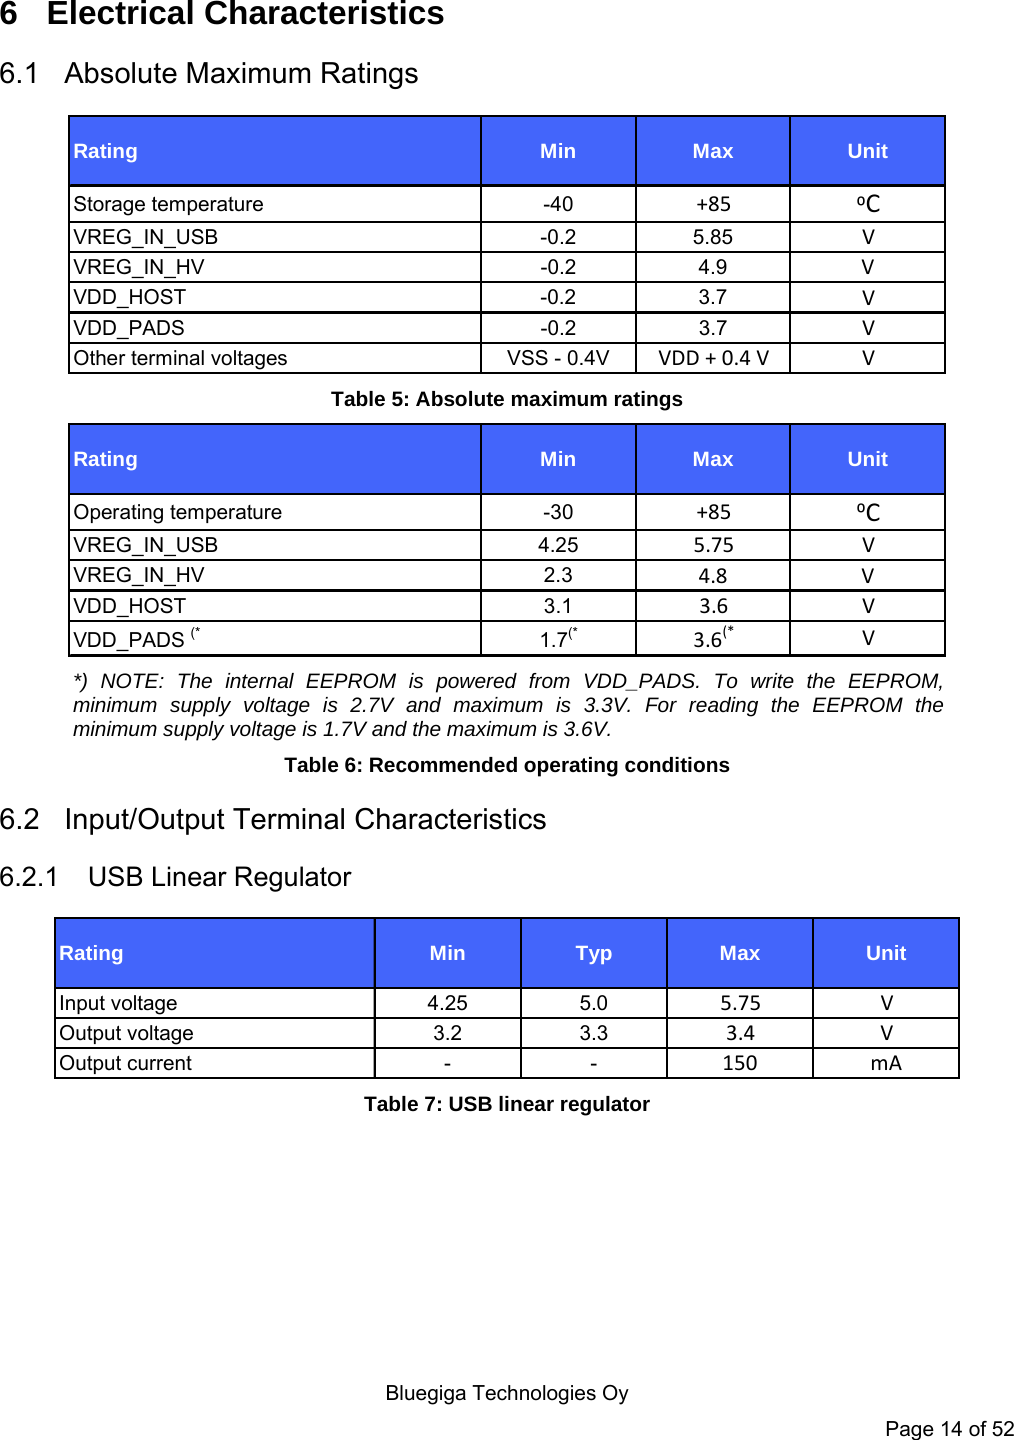    Bluegiga Technologies Oy Page 14 of 52 6 Electrical Characteristics 6.1 Absolute Maximum Ratings Rating Min Max UnitStorage temperature -40+85 ⁰CVREG_IN_USB -0.2 5.85VVREG_IN_HV -0.2 4.9VVDD_HOST -0.2 3.7VVDD_PADS -0.2 3.7VOther terminal voltages VSS - 0.4VVDD + 0.4 V V Table 5: Absolute maximum ratings Rating Min Max UnitOperating temperature -30 +85 ⁰CVREG_IN_USB 4.25 5.75 VVREG_IN_HV 2.3 4.8 VVDD_HOST 3.1 3.6 VVDD_PADS (*1.7(*3.6(*V *) NOTE: The internal EEPROM is powered from VDD_PADS. To write the EEPROM, minimum supply voltage is 2.7V and maximum is 3.3V. For reading the EEPROM the minimum supply voltage is 1.7V and the maximum is 3.6V.  Table 6: Recommended operating conditions 6.2  Input/Output Terminal Characteristics 6.2.1  USB Linear Regulator Rating Min Typ Max UnitInput voltage 4.25 5.05.75 VOutput voltage 3.2 3.33.4 VOutput current - -150 mA Table 7: USB linear regulator  